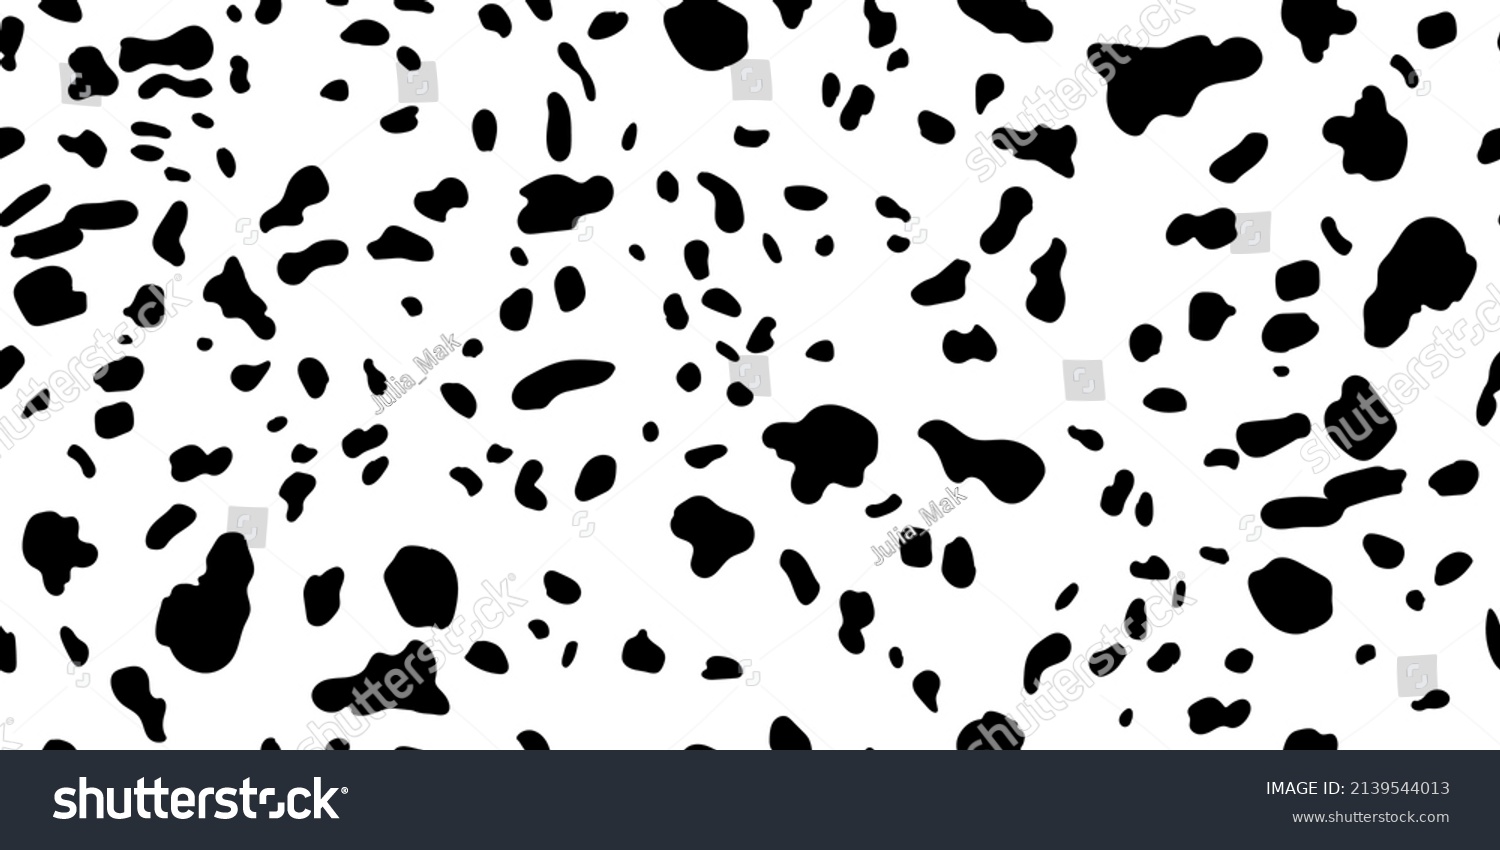 SVG of Dalmatians vector seamless horizontal pattern. Spotted animal texture of dog, leopard, cow. Black random spots on a white background. svg